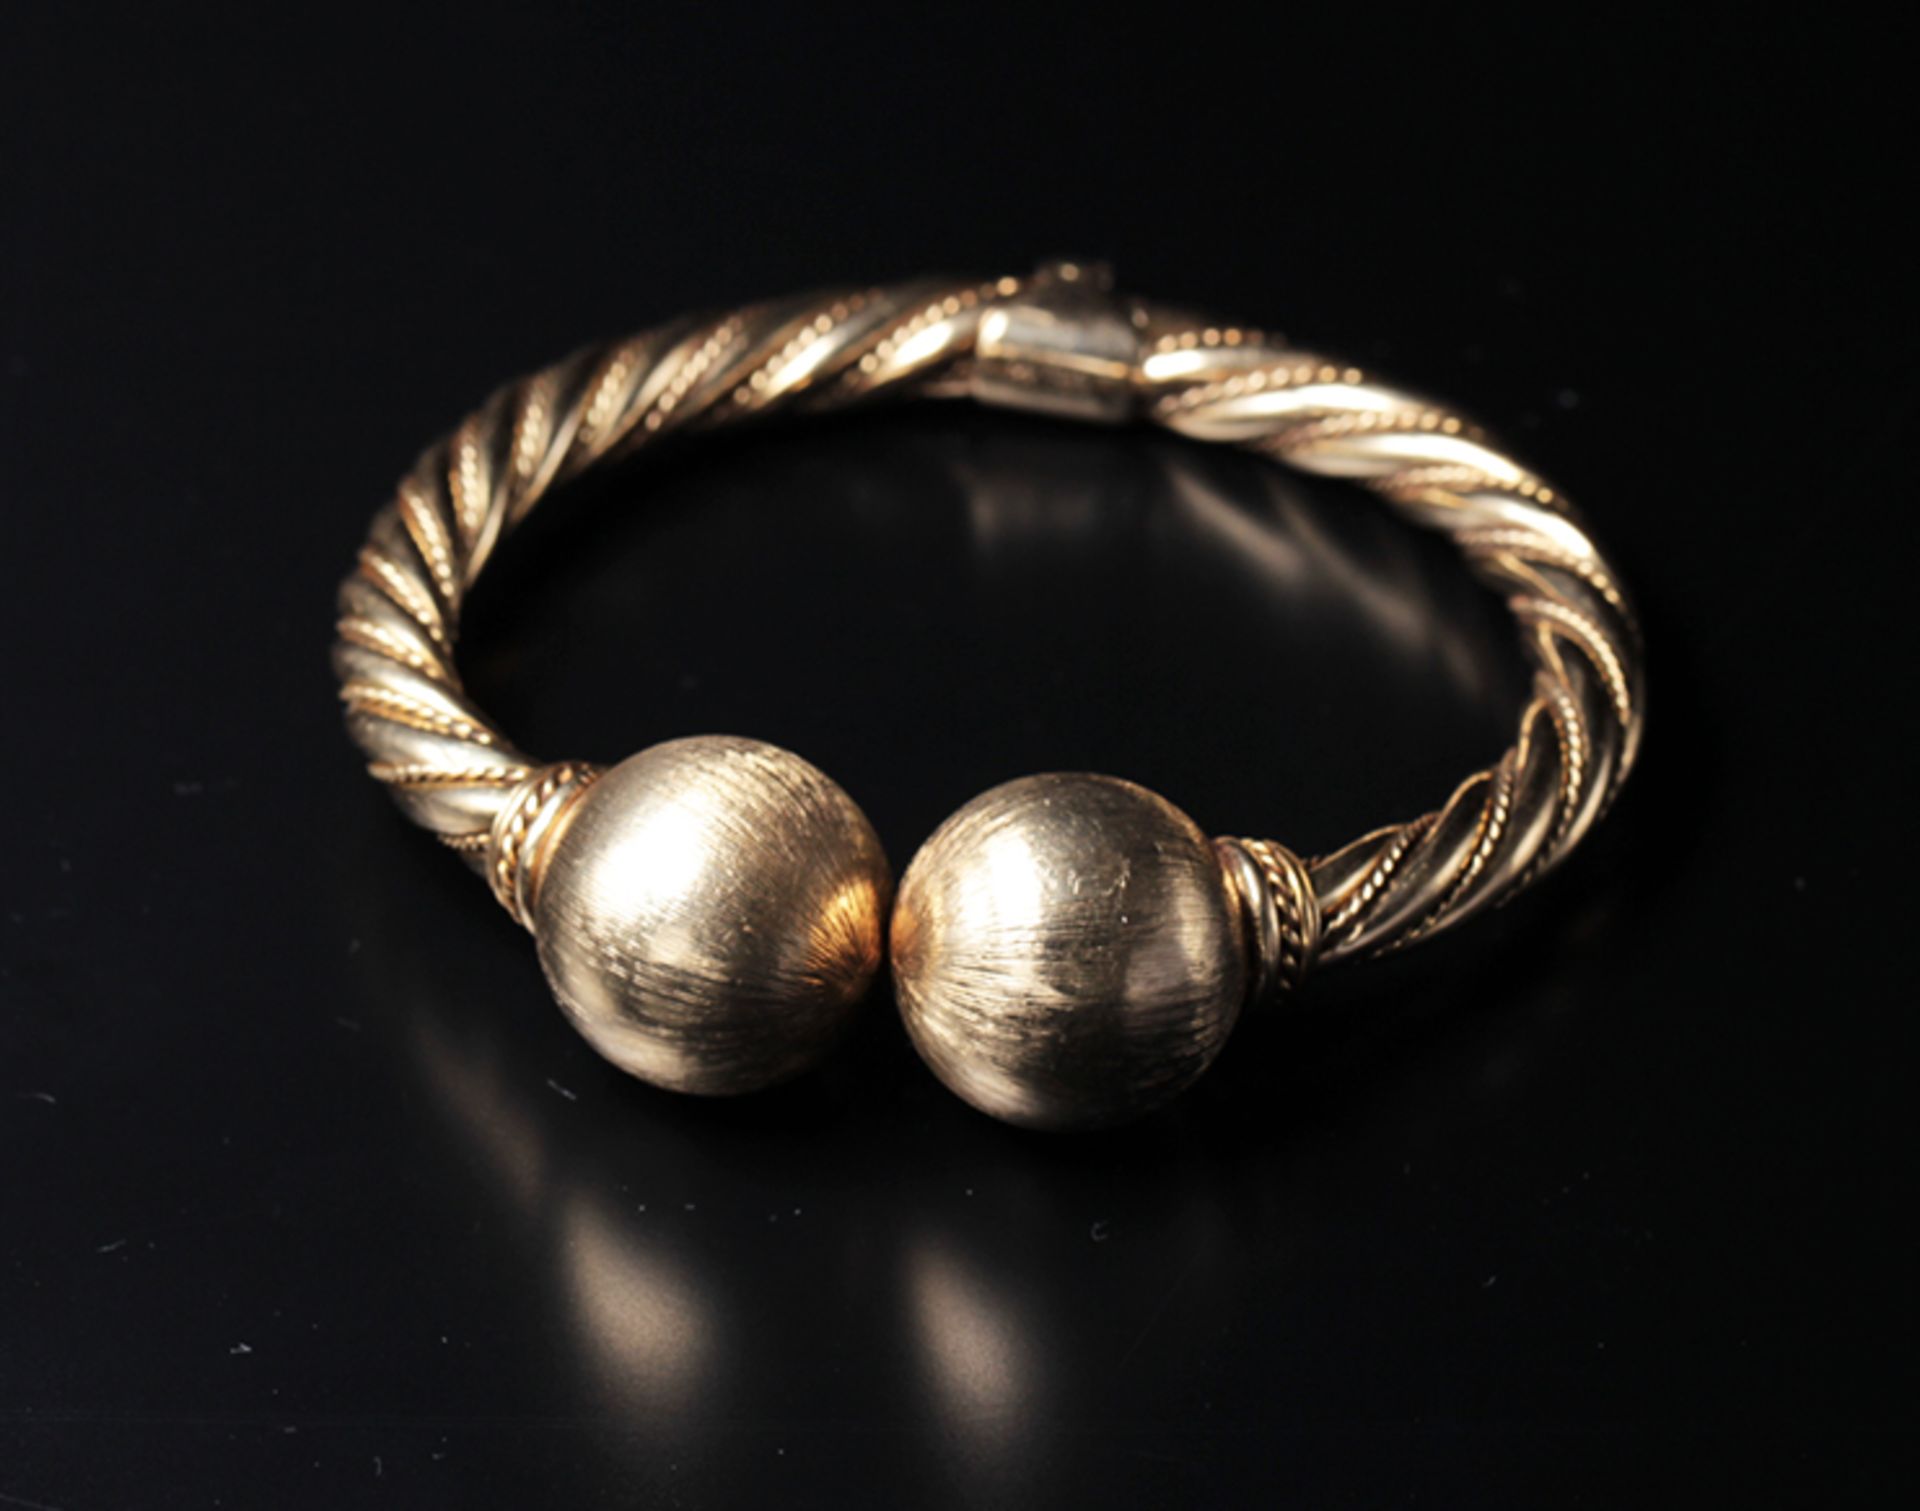 The bangle is made of twisted gold wires and has round spheres at the end.The spheres have a